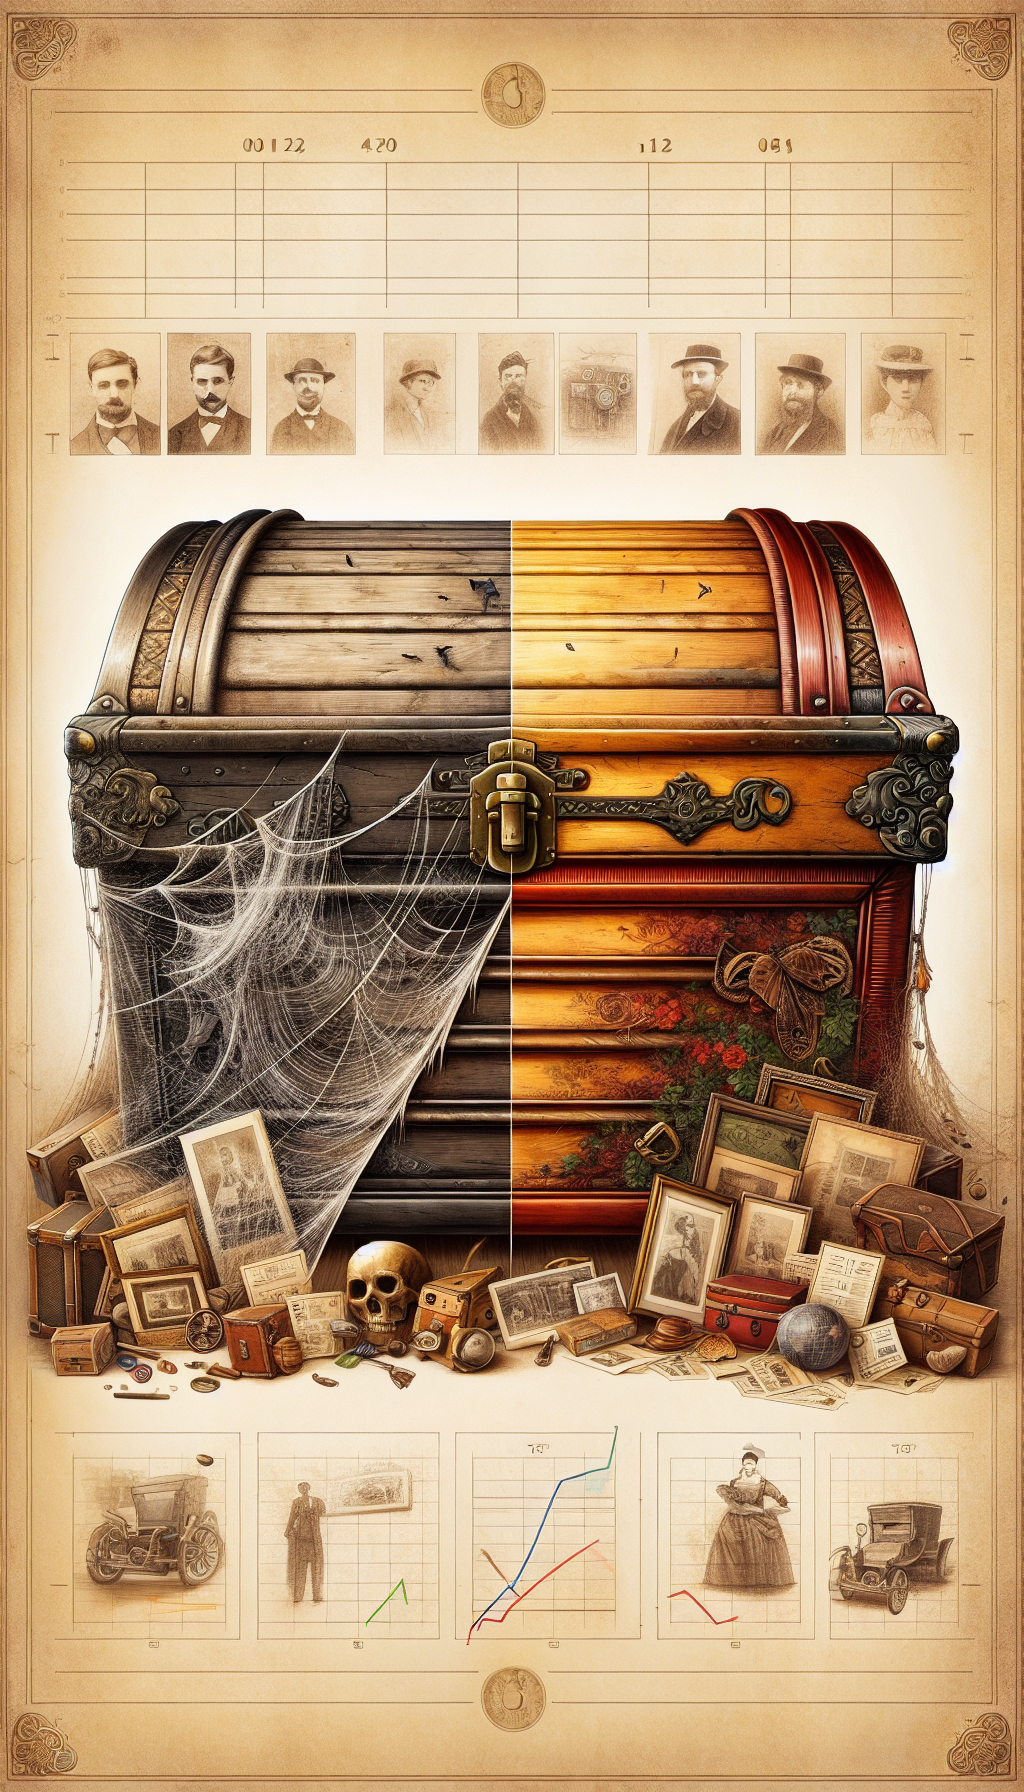 An enchanting illustration featuring a half-restored antique trunk that merges two worlds: the left side is weathered, covered in cobwebs, and accompanied by vintage sepia-tone memorabilia, symbolizing the trunk's past; the right side is vibrant, polished wood with gleaming brass hardware, surrounded by illustrations of appreciative collectors and escalating auction value indicators, celebrating its renewed splendor and worth.